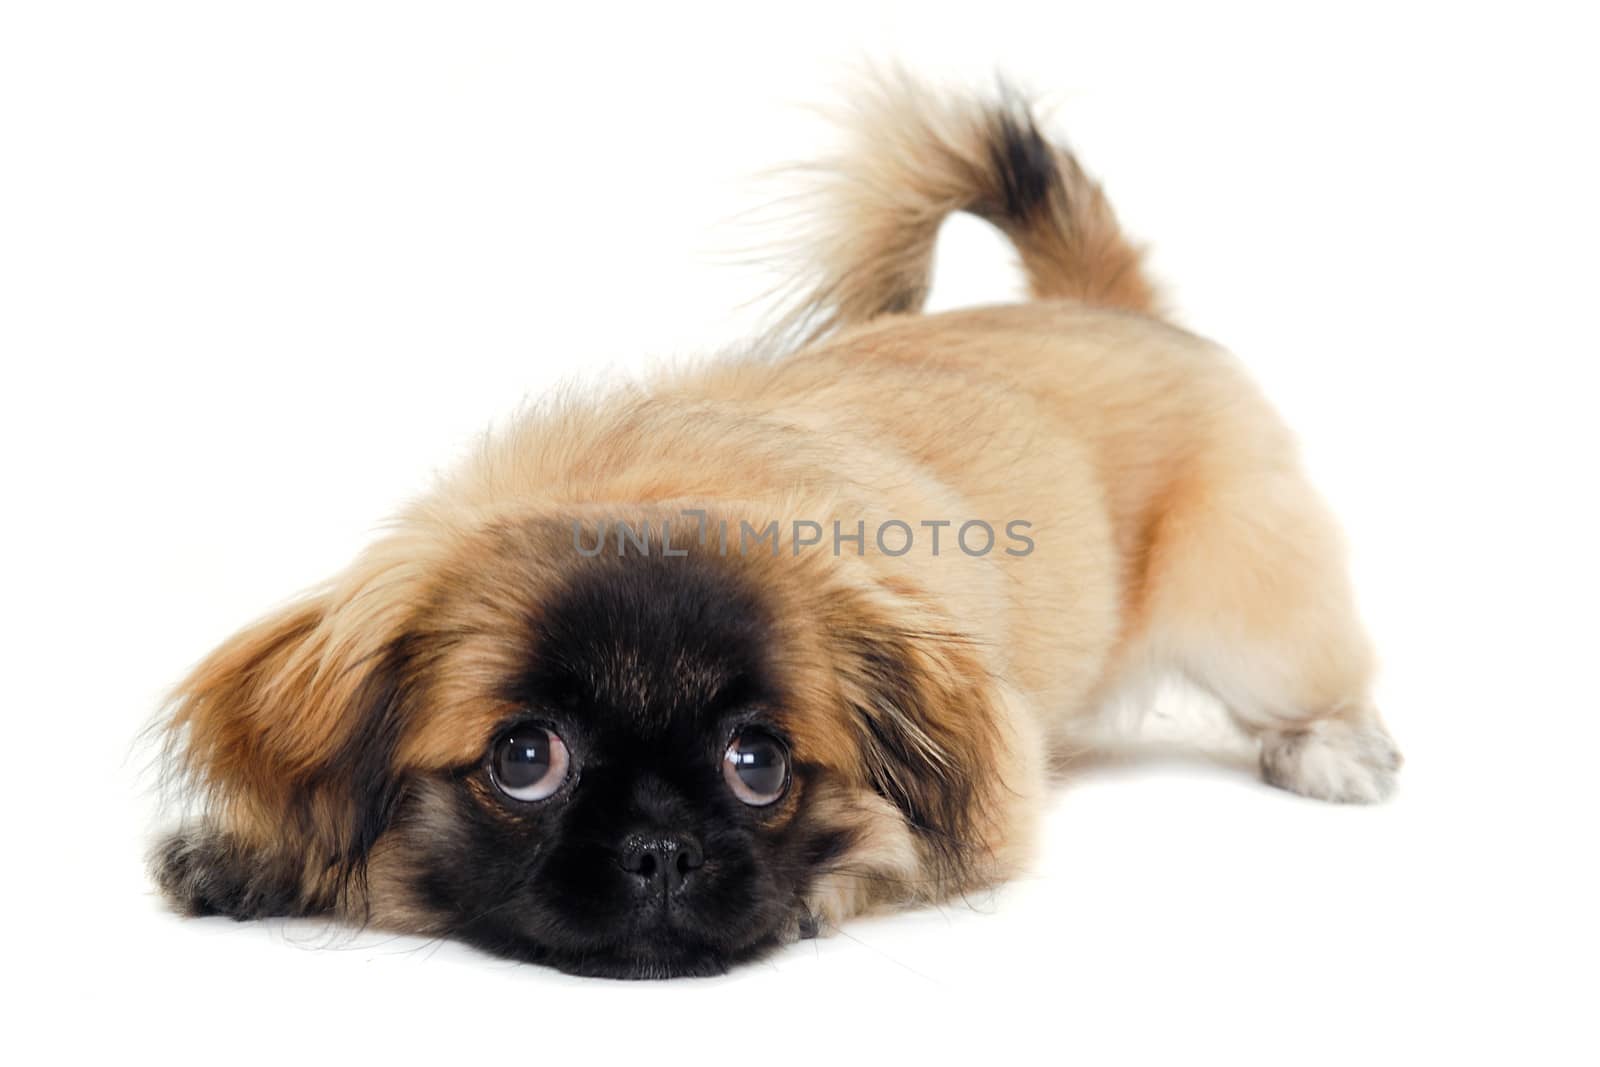 A sweet sad puppy dog resting on a white background